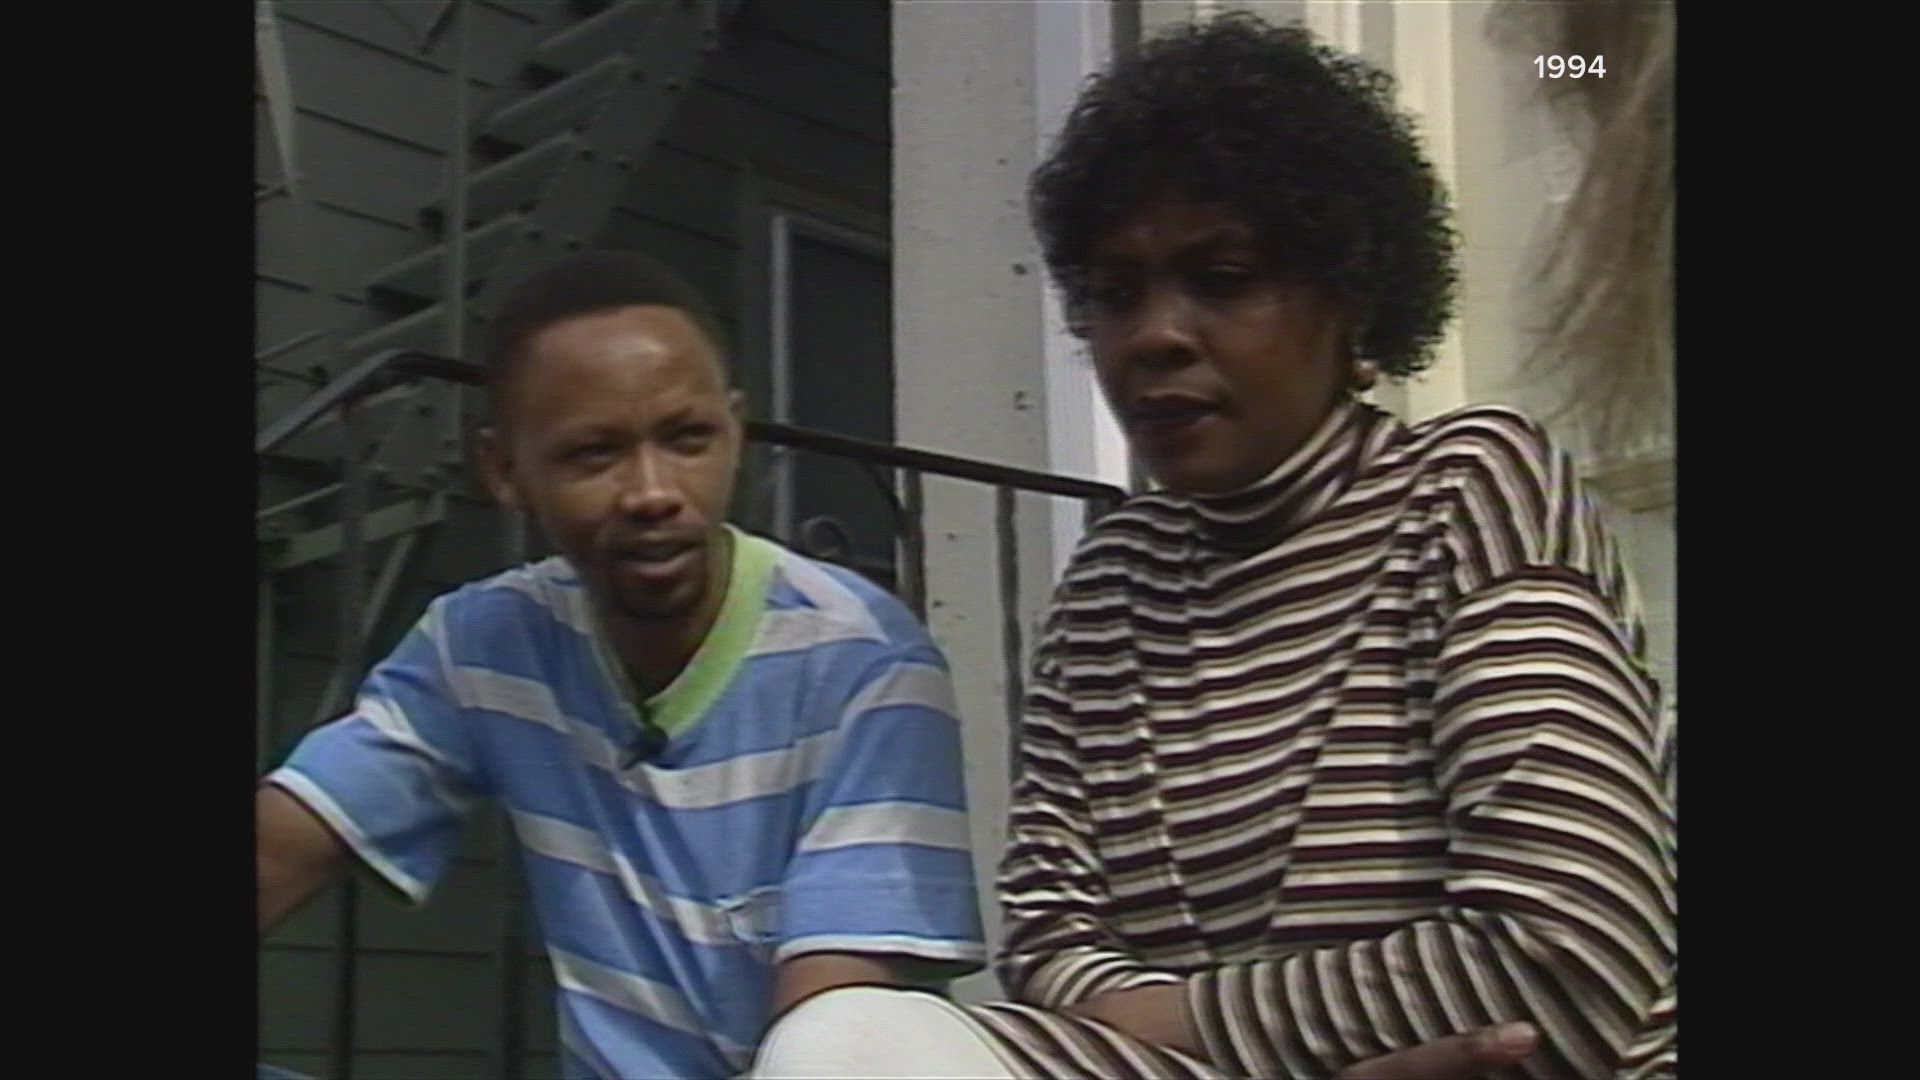 One family that fled South Africa wound up settling in Portland, but they still got to cast ballots during that election. Here's a look back at that story from 1994.